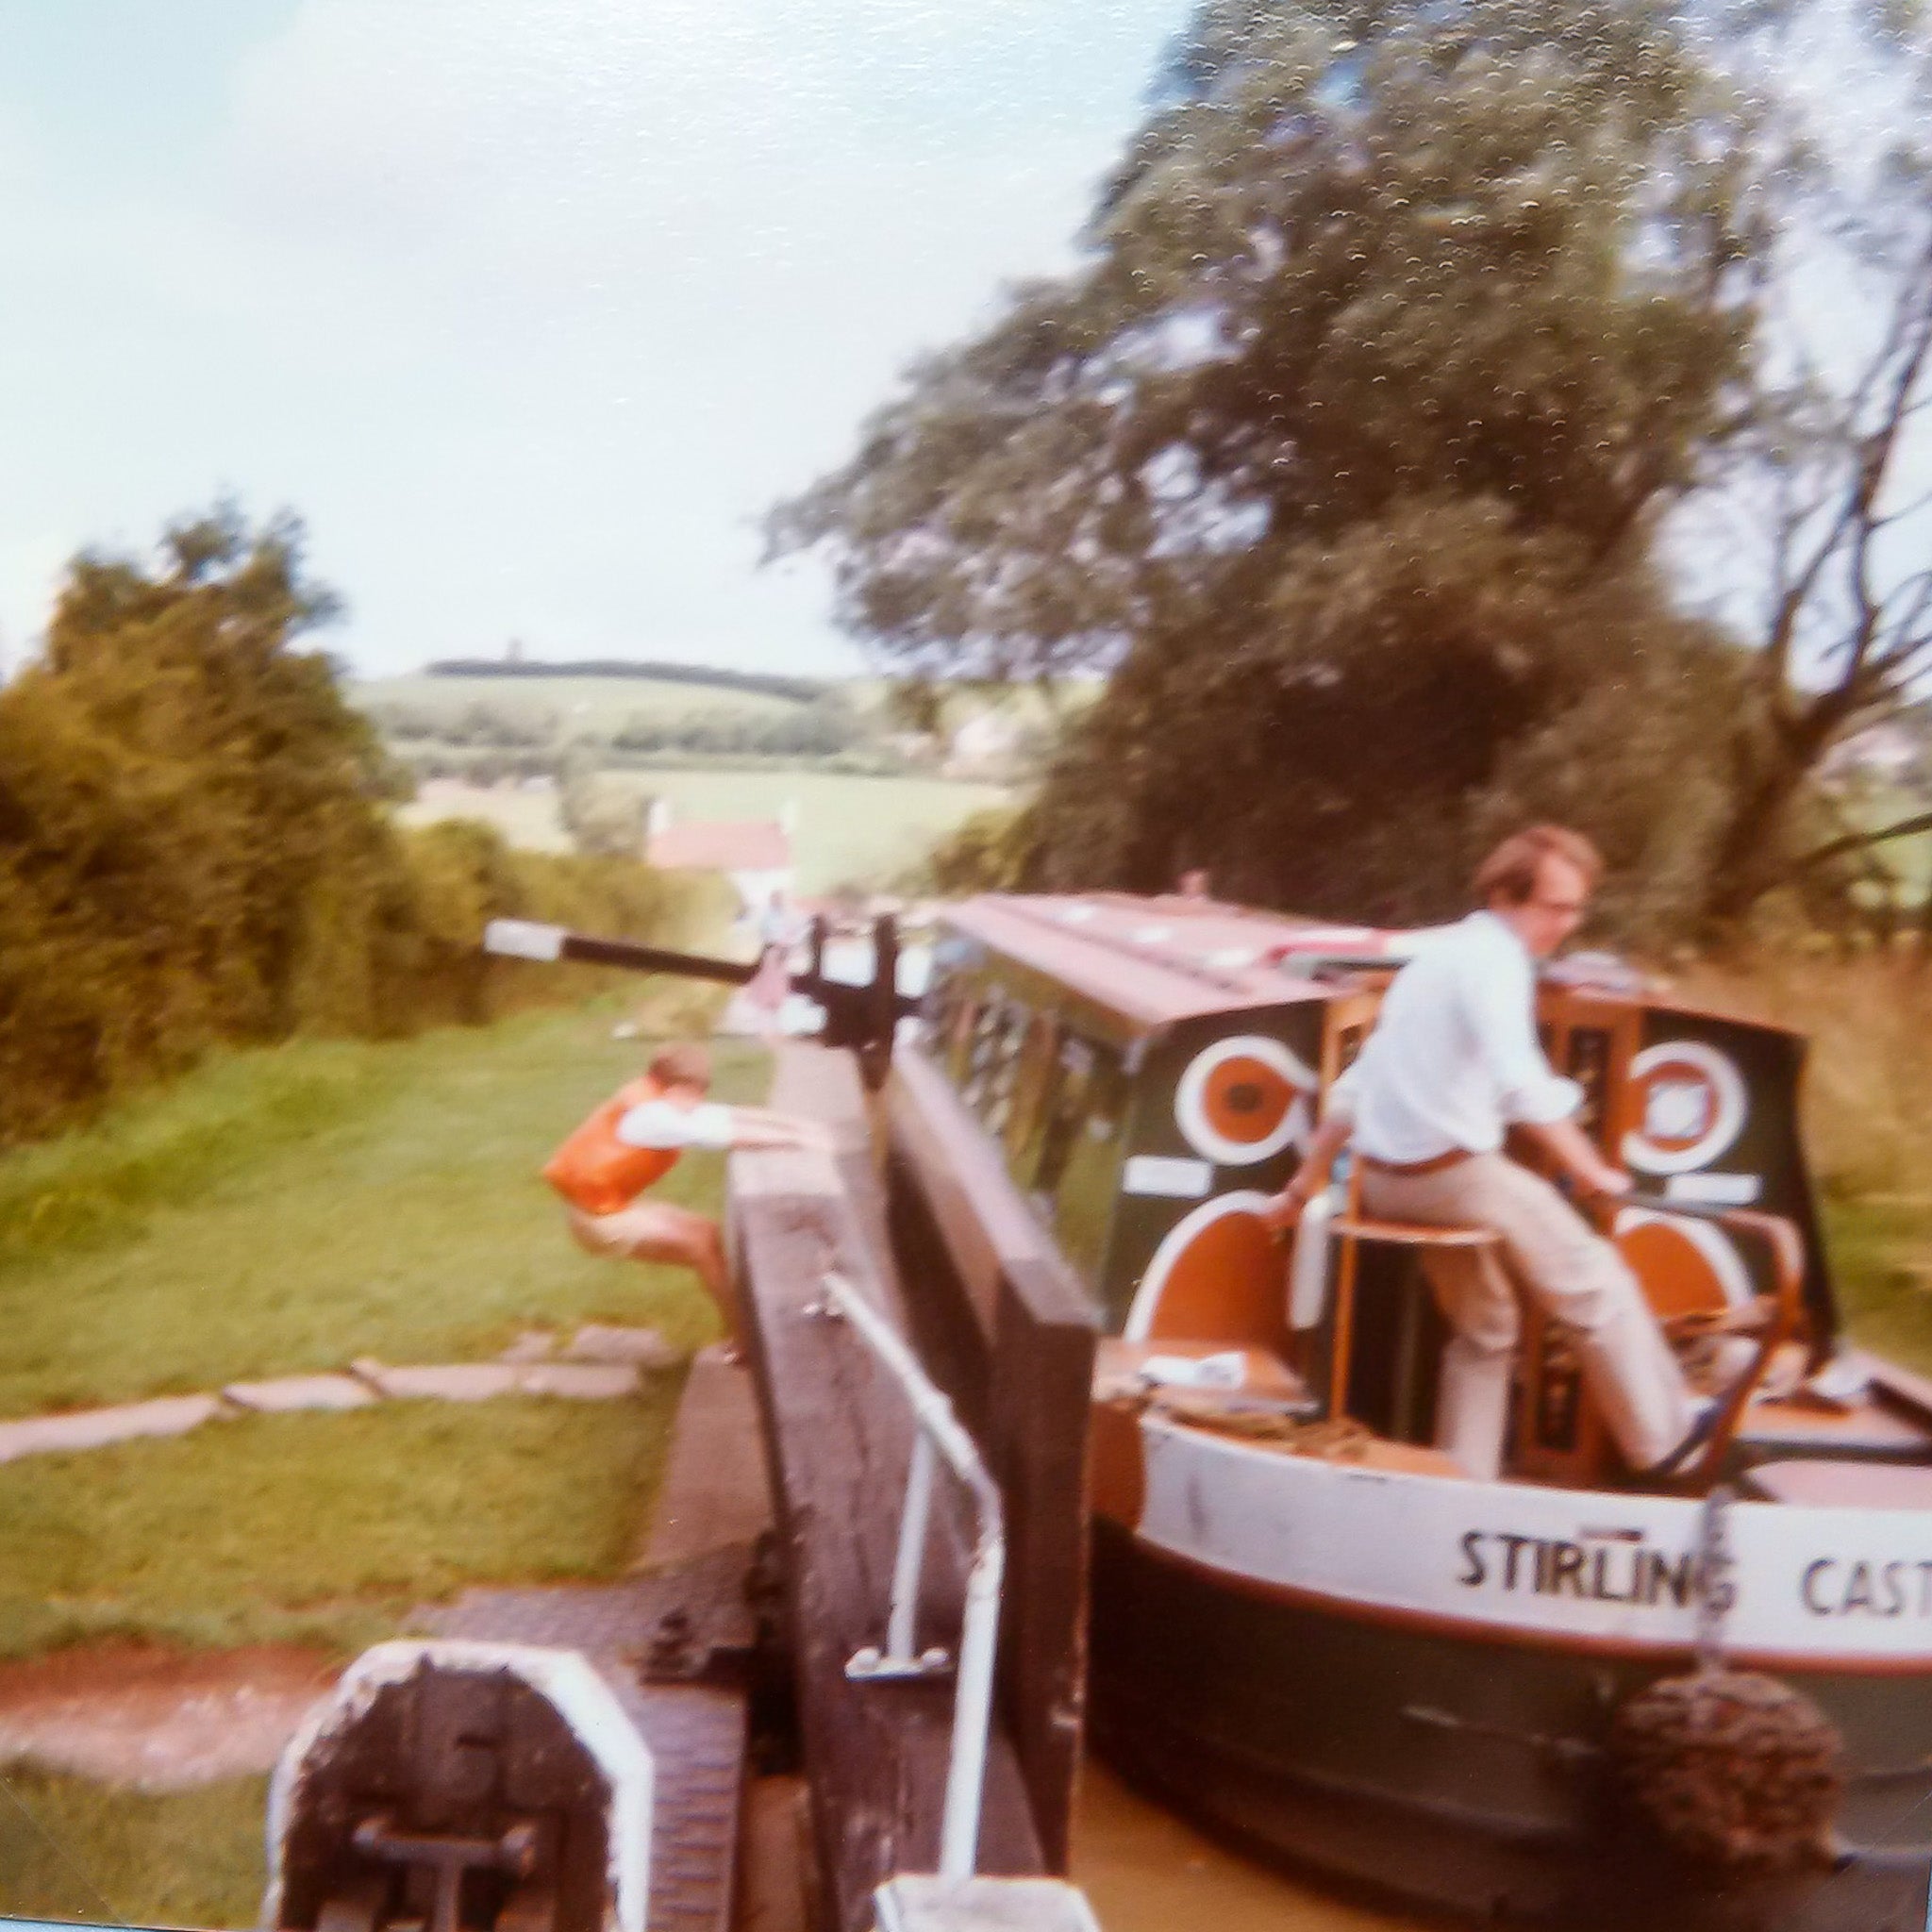 Jim and Ken on a damp boating trip circa 1980